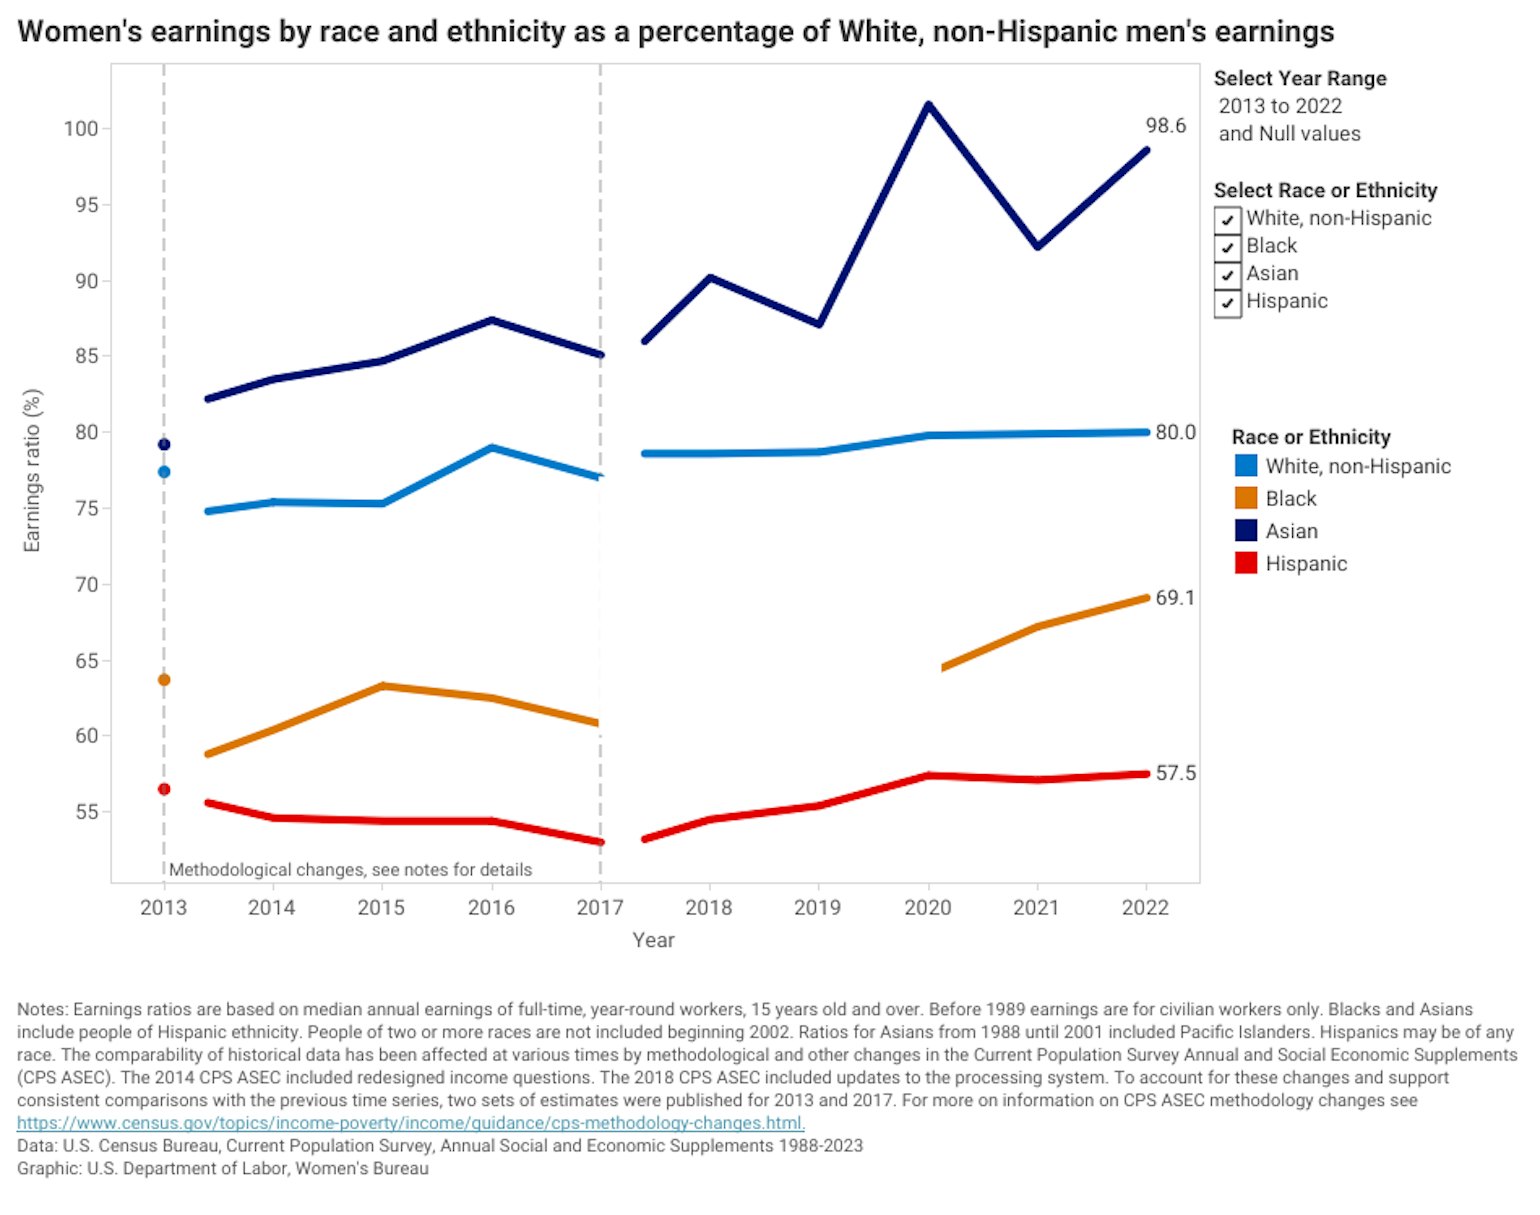 Graphic showing women's earnings by race and ethnicity as a percentage of white, non-hispanic men's earnings.